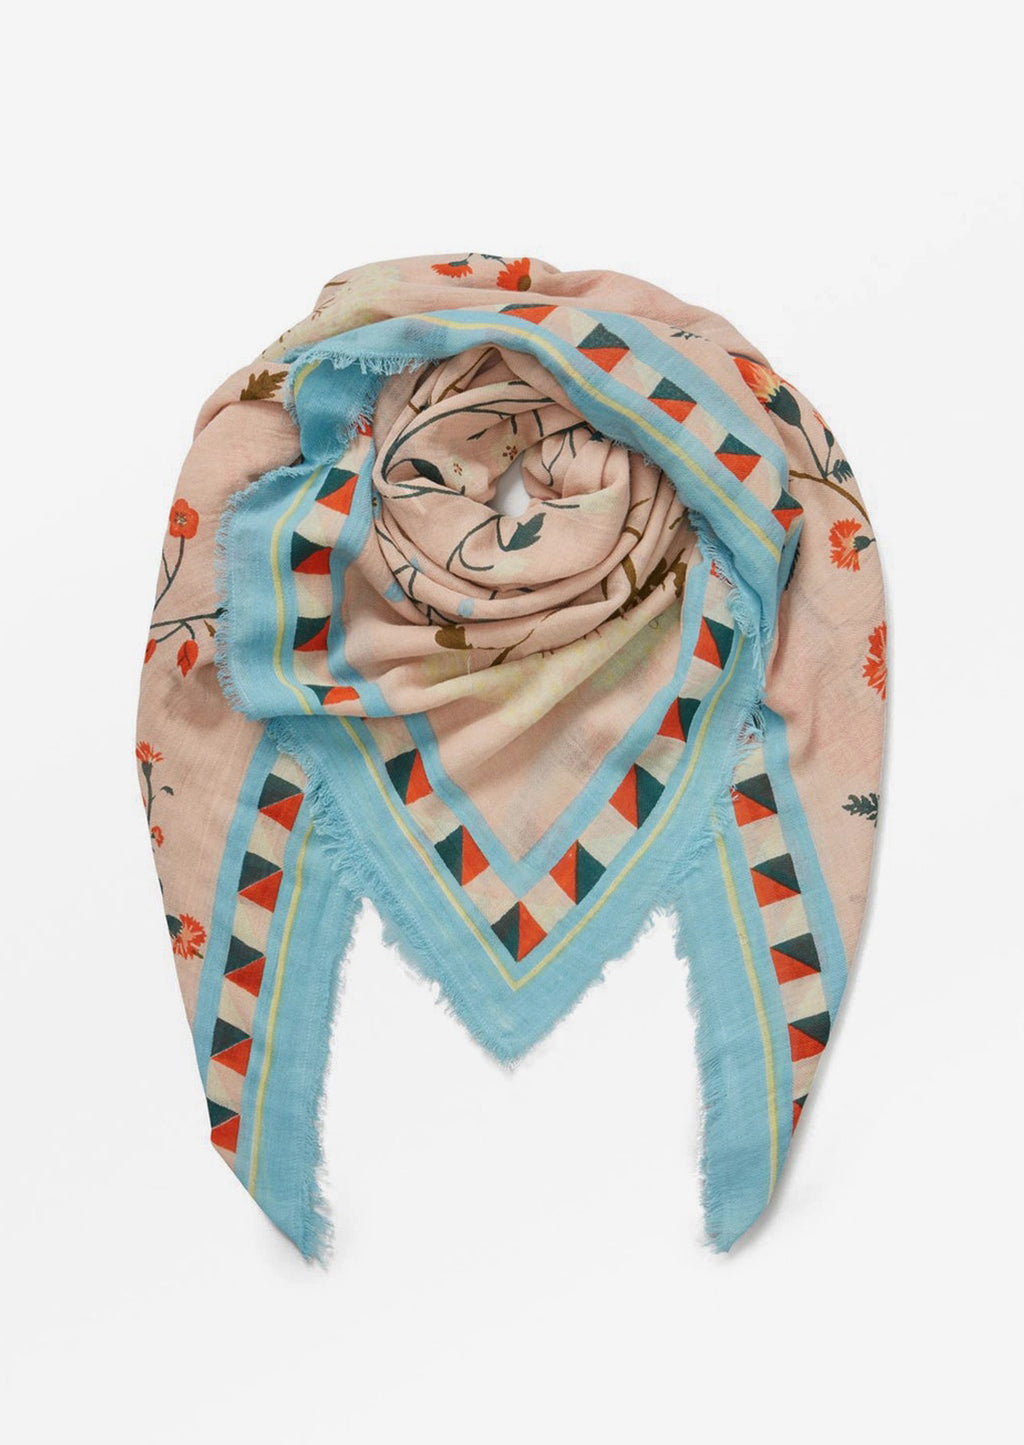 3: A scarf with blue geometric print border and orange and blue wildflower print.